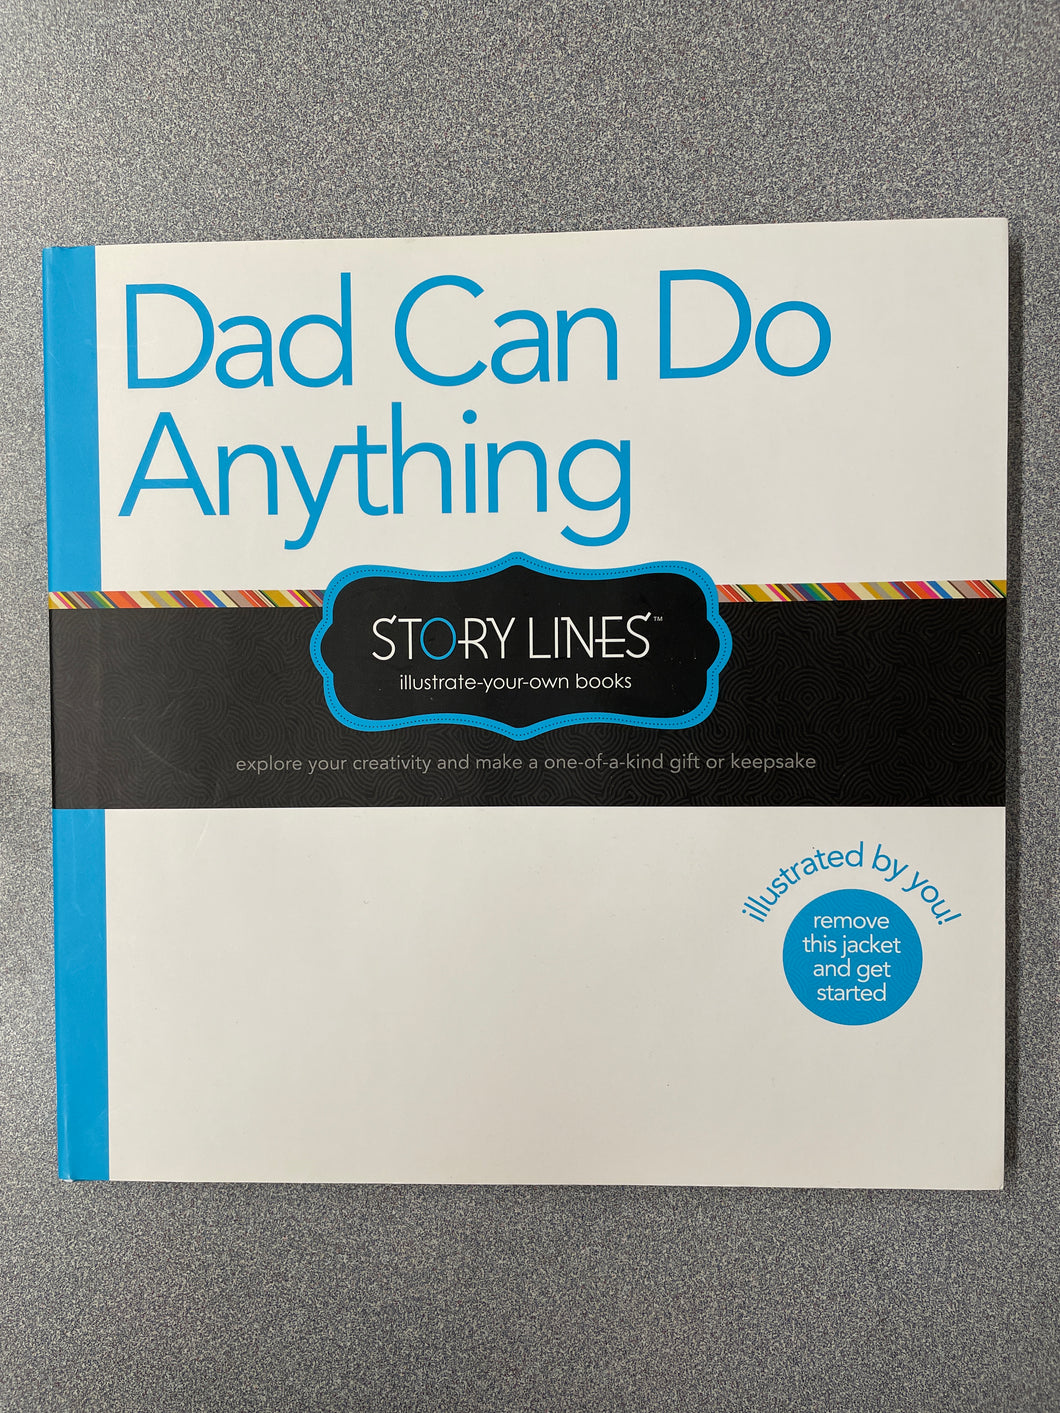 Dad Can Do Anything: Story Lines--Illustrate-Your-Own Books, Clark, M. H. [2013] CN  12/23